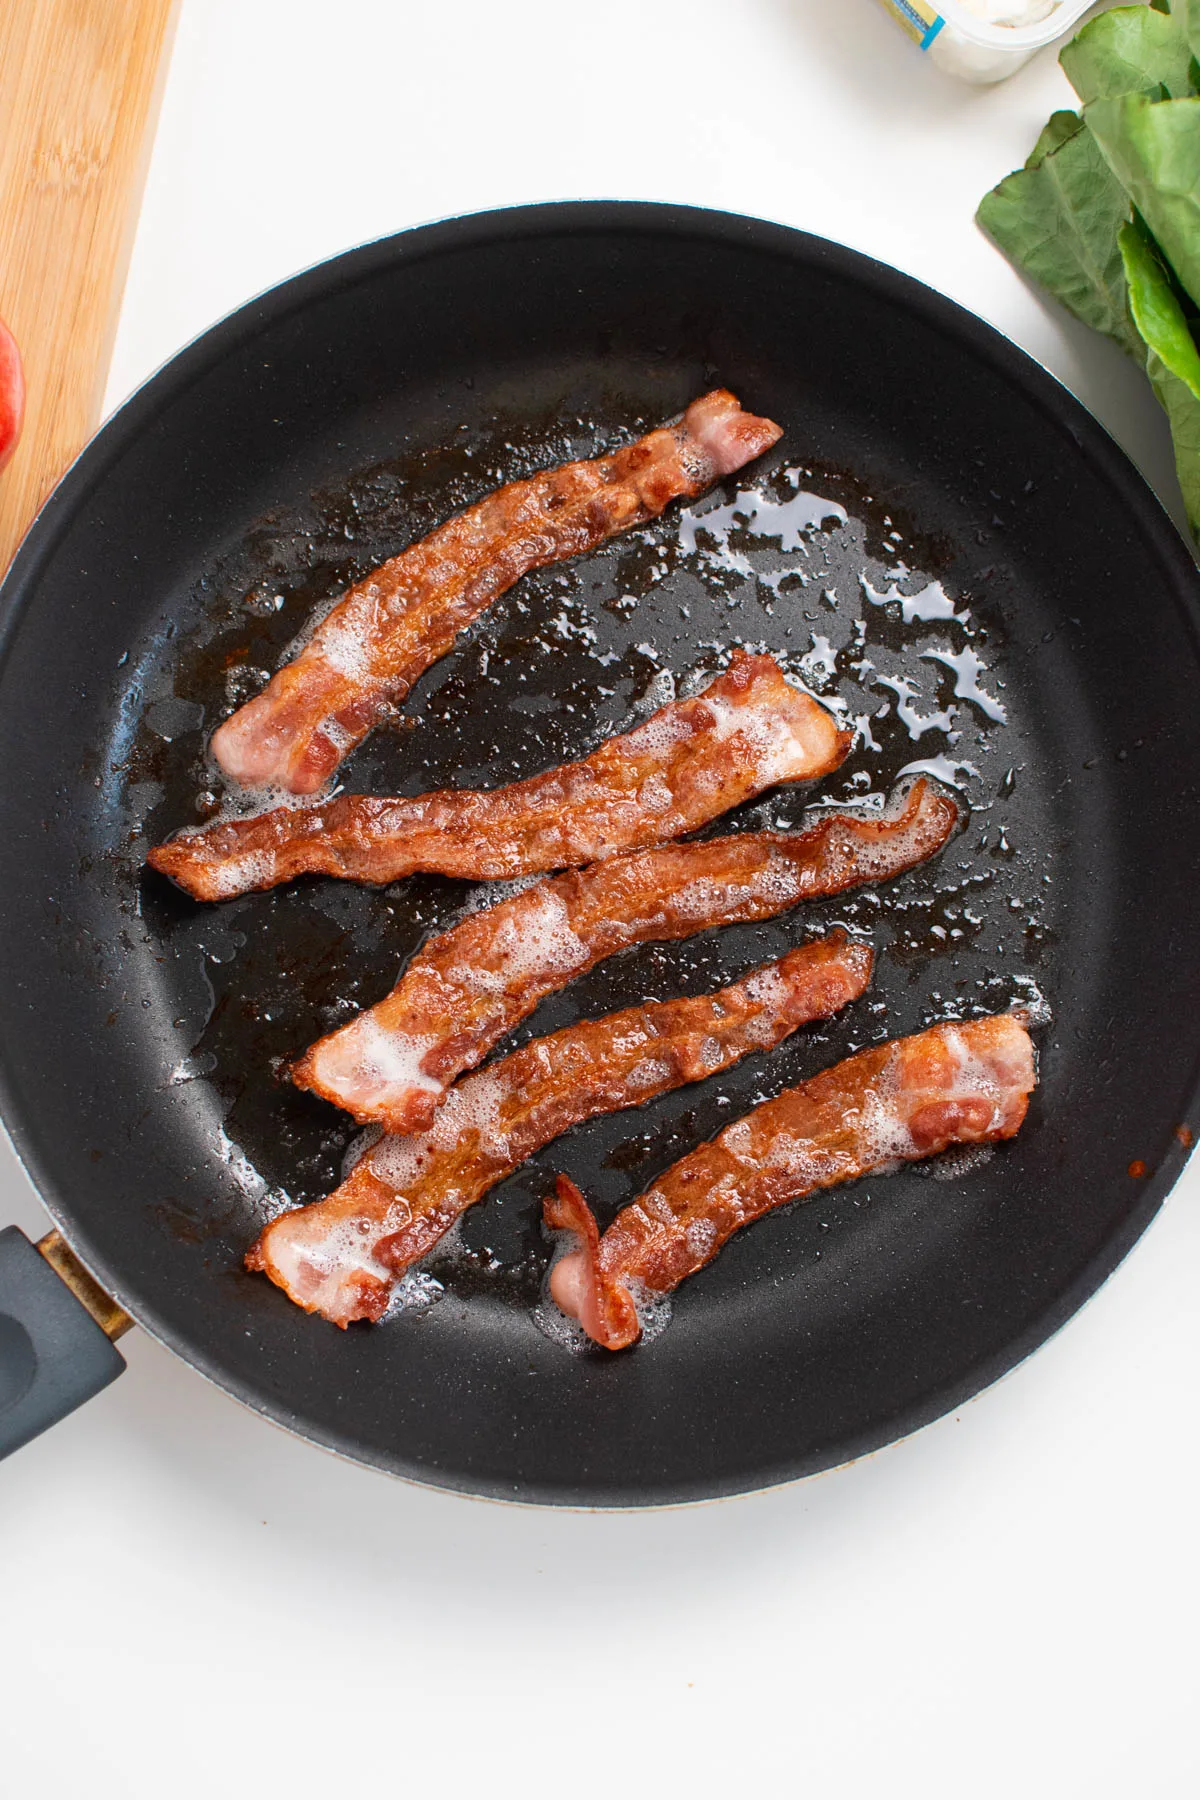 Five pieces of cooked bacon in black frying pan on white table.